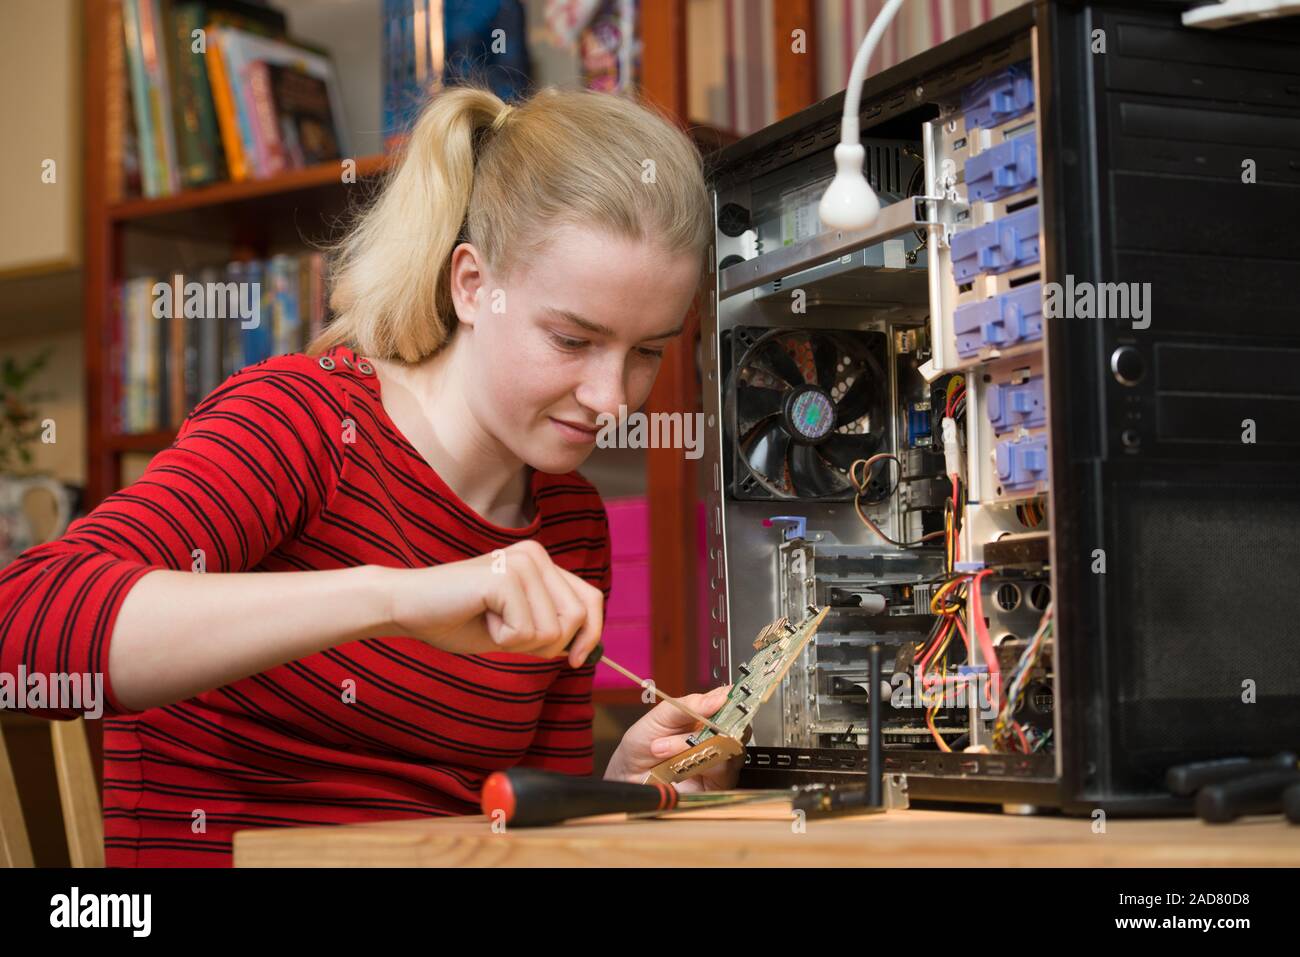 Happy teenage girl using a screwdriver on an expansion card printed circuit board from an open PC while making repairs to the computer. Stock Photo